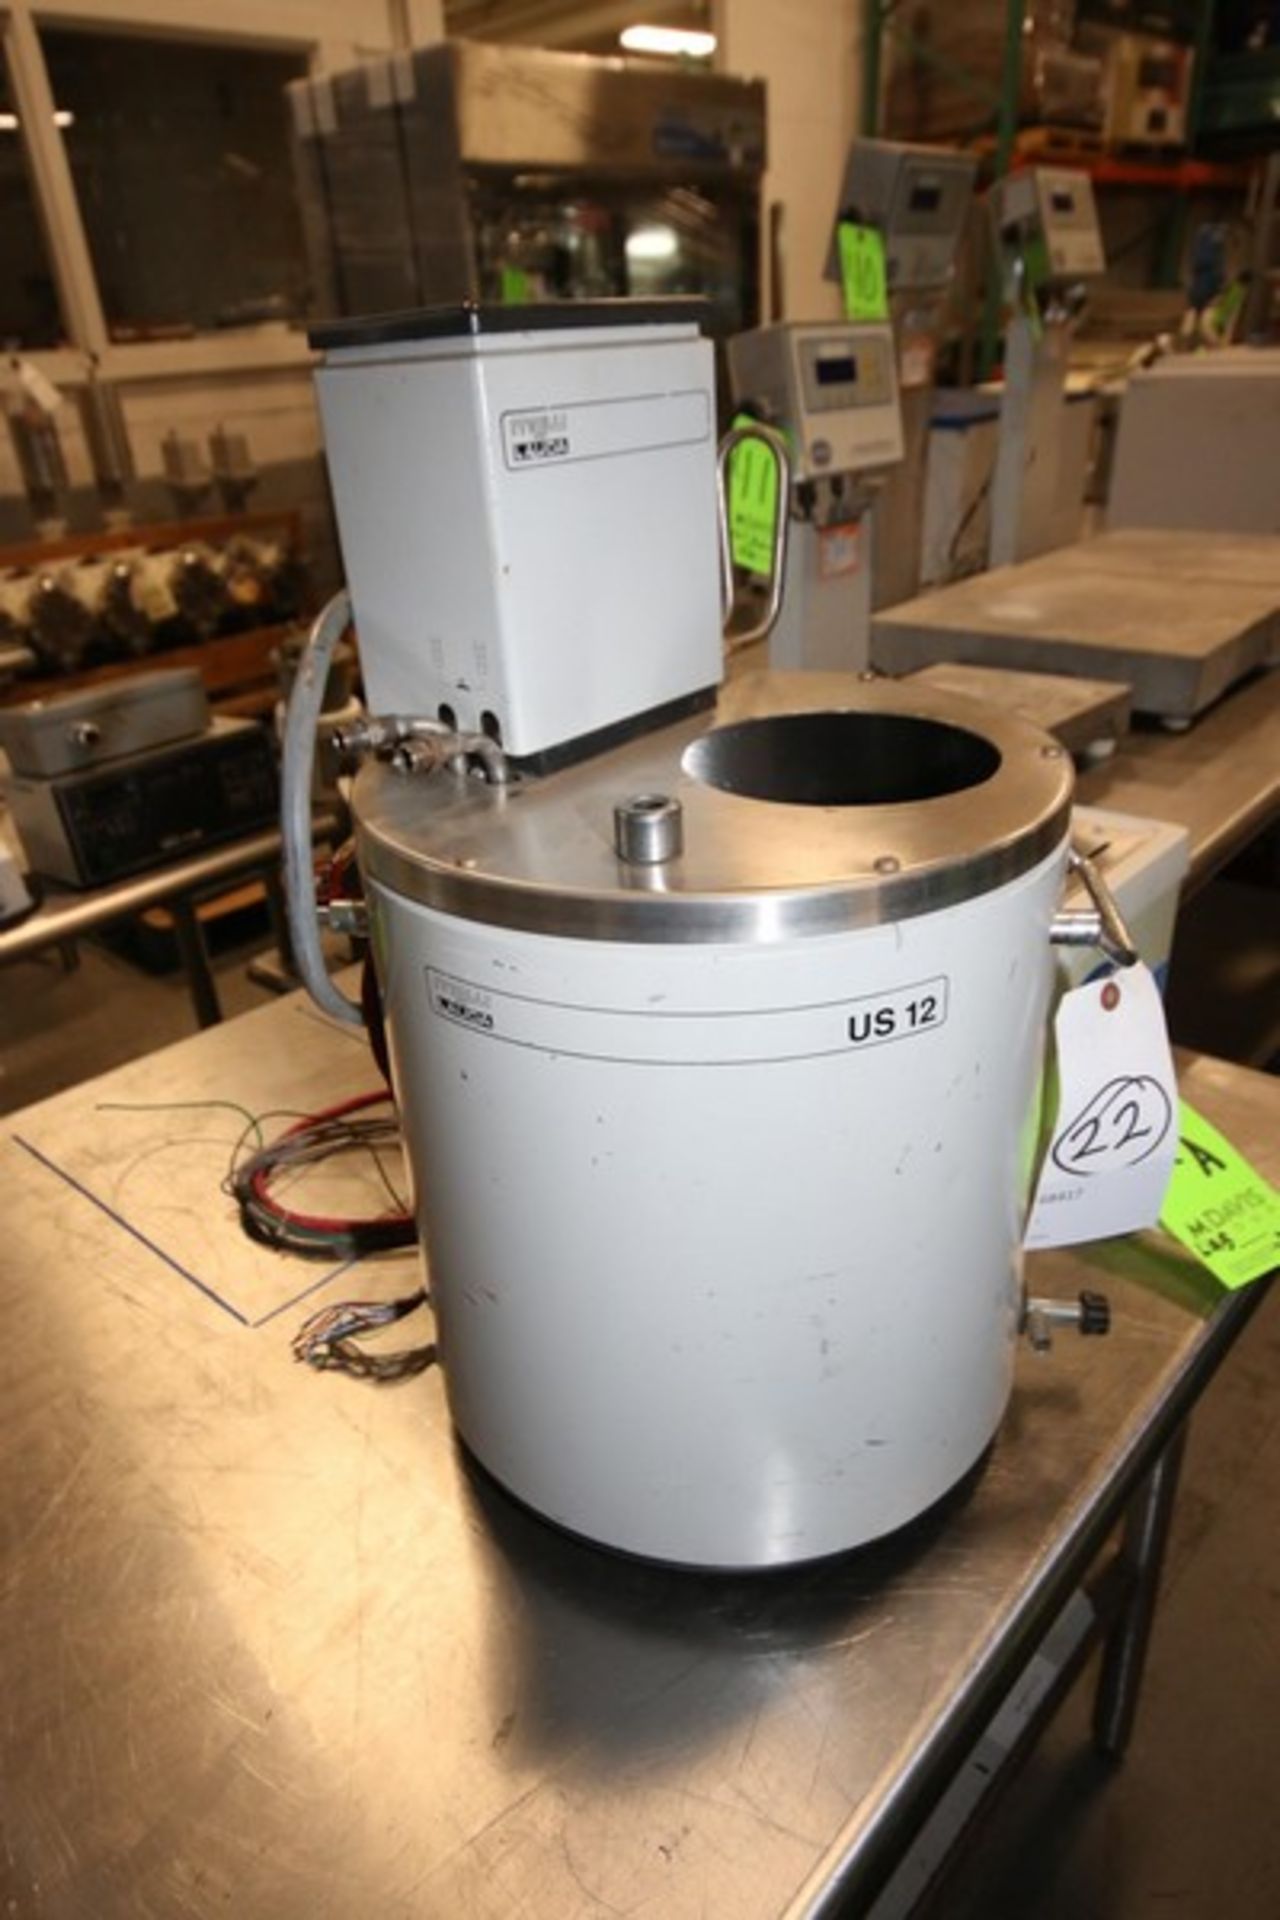 MGW Laida Water Bath, Type USH12, SN J08001FN,230V, Includes R400 Controller (NOTE: Missing Top